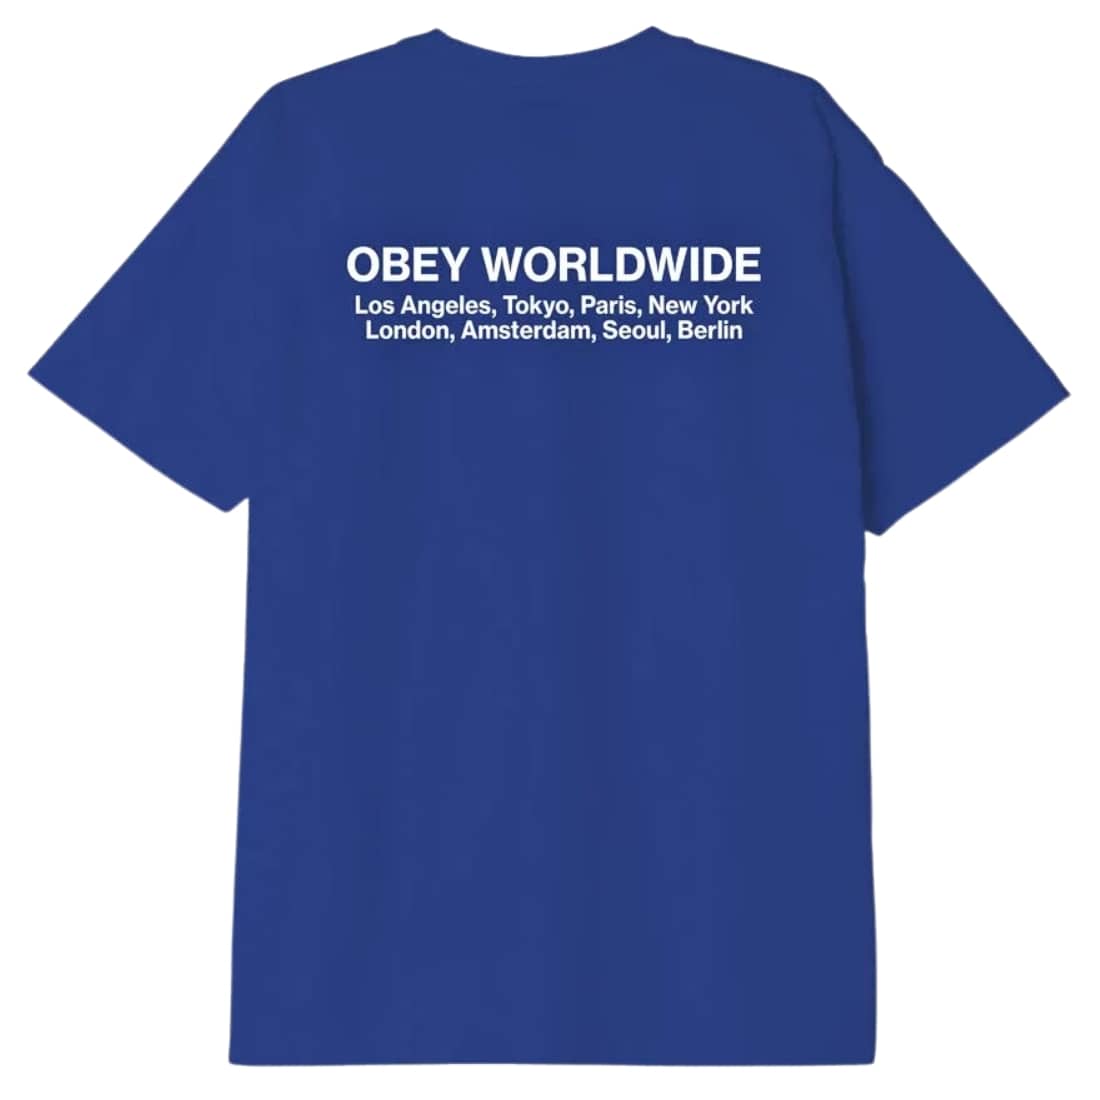 Obey Worldwide Cities T-Shirt - Surf Blue - Mens Graphic T-Shirt by Obey